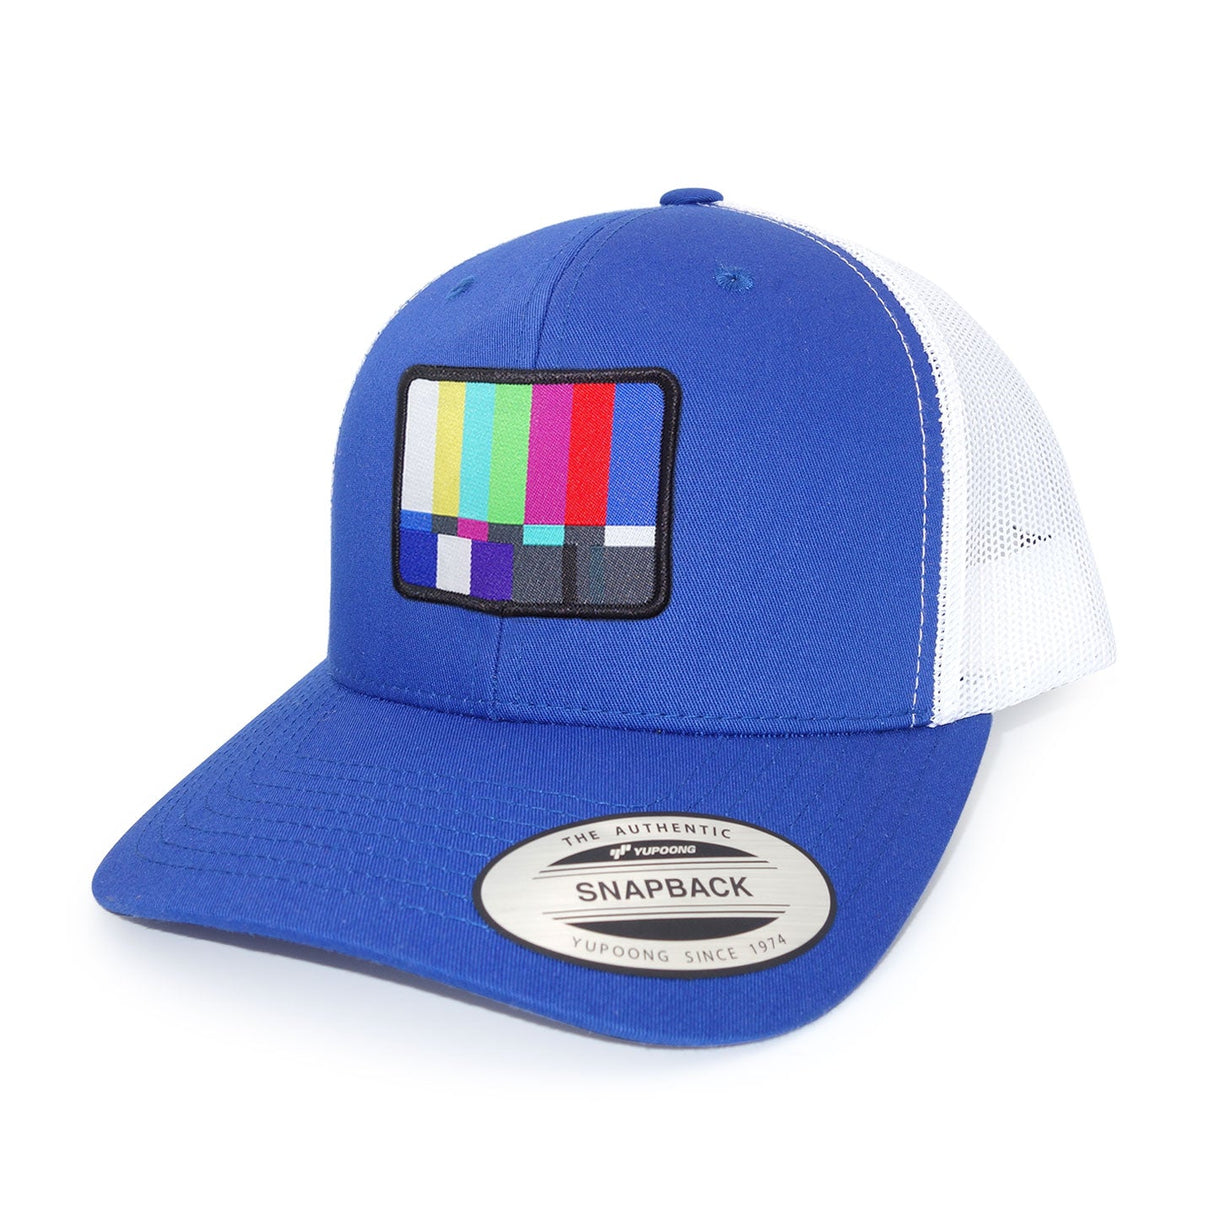 Technical Difficulties Royal Blue and White Trucker Cap